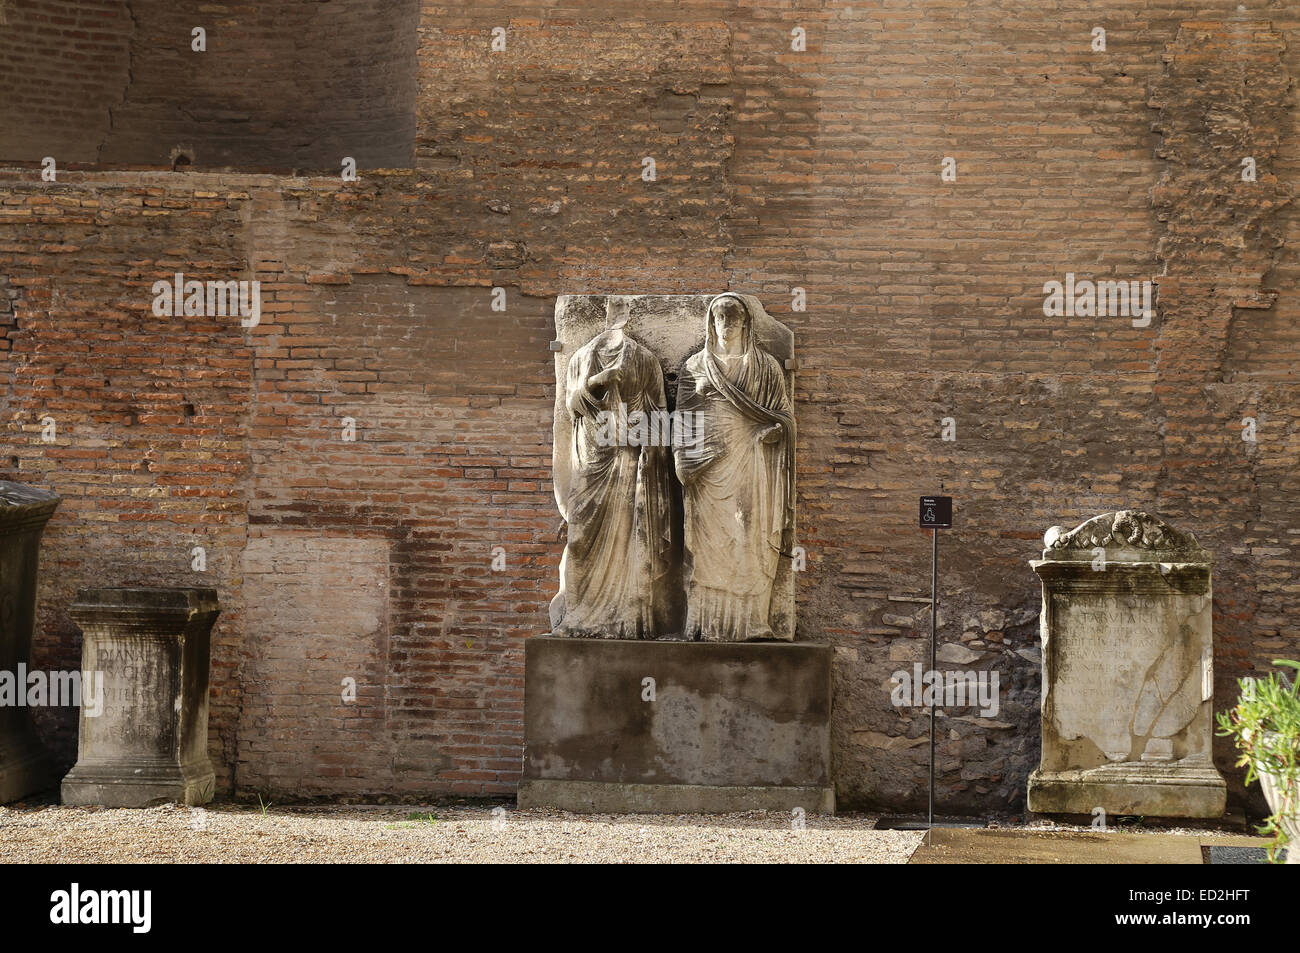 Italy. Rome. Baths of Diocletian. Rome. Ruins. Exterior. Courtyard. Stock Photo